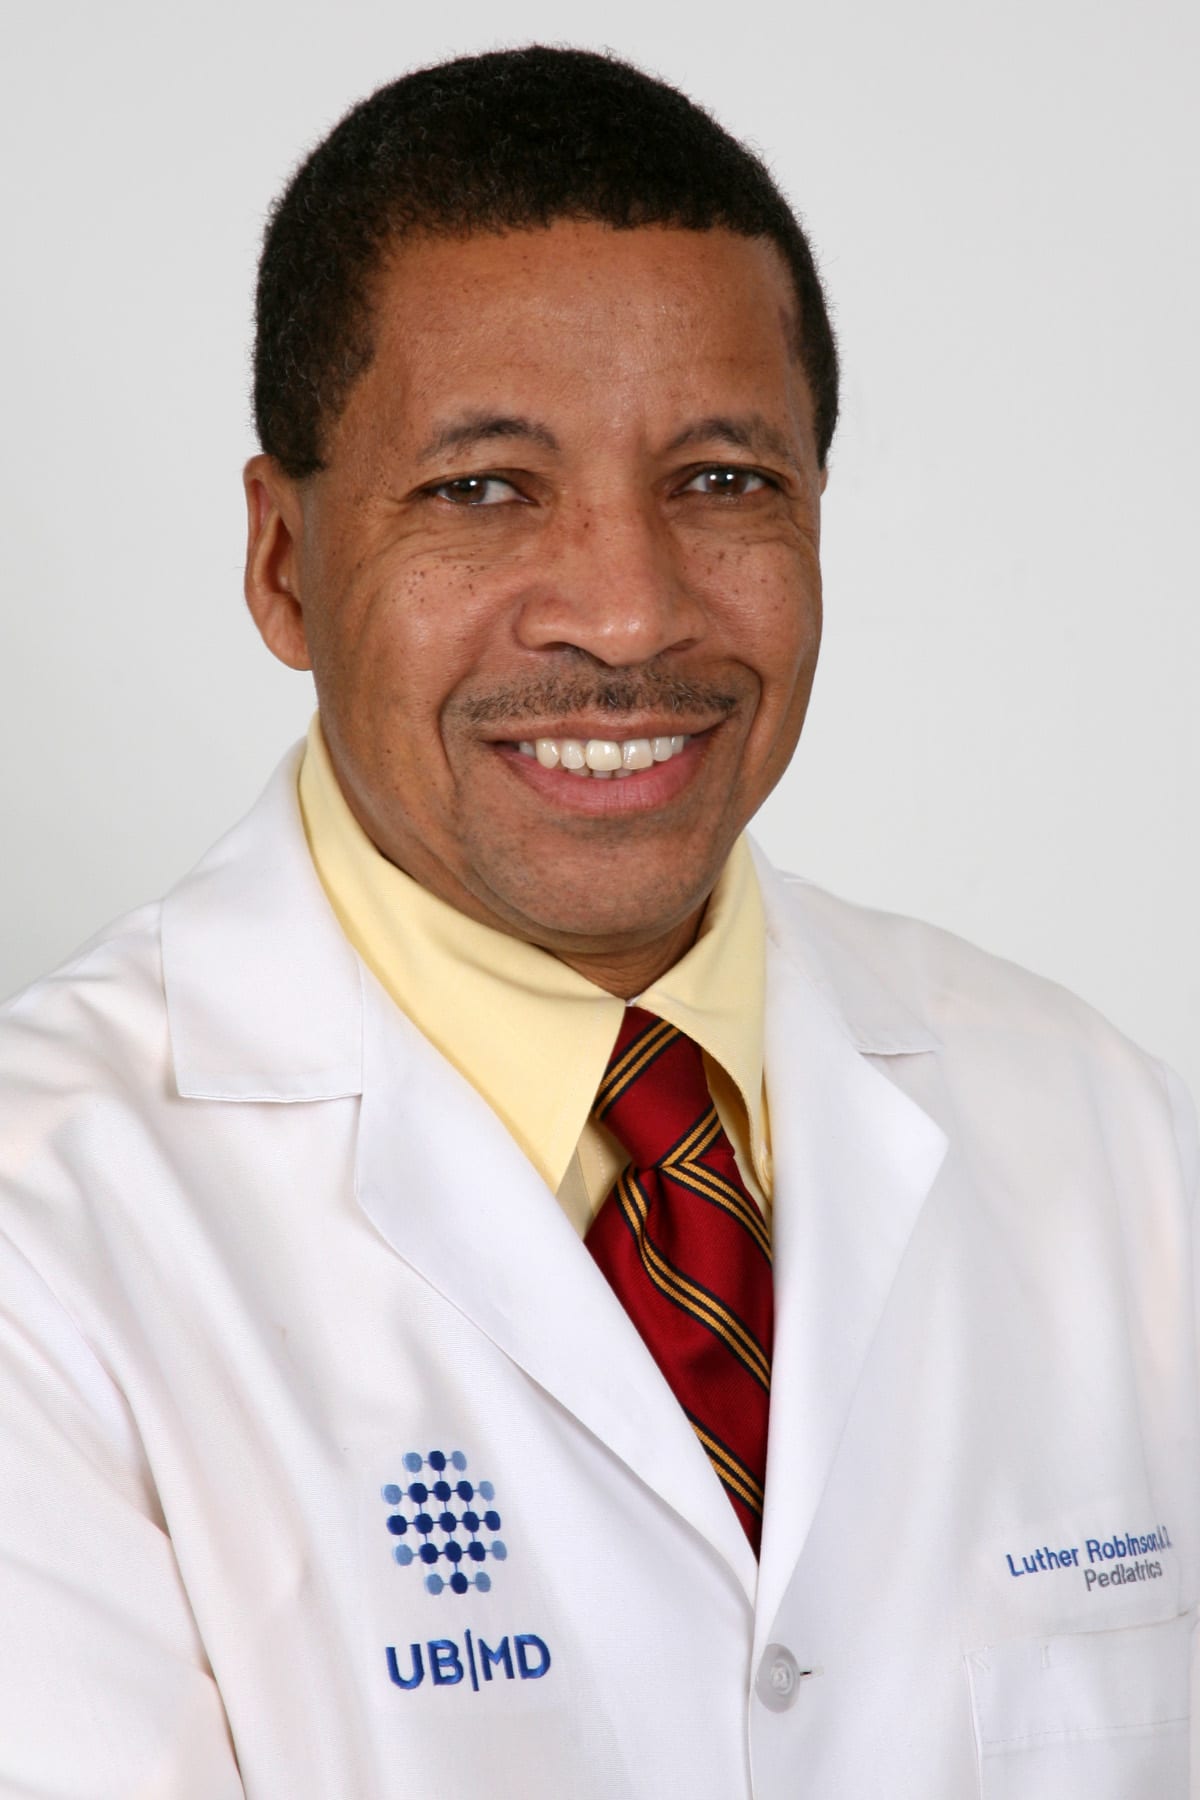 Dr. Luther Knox Robinson